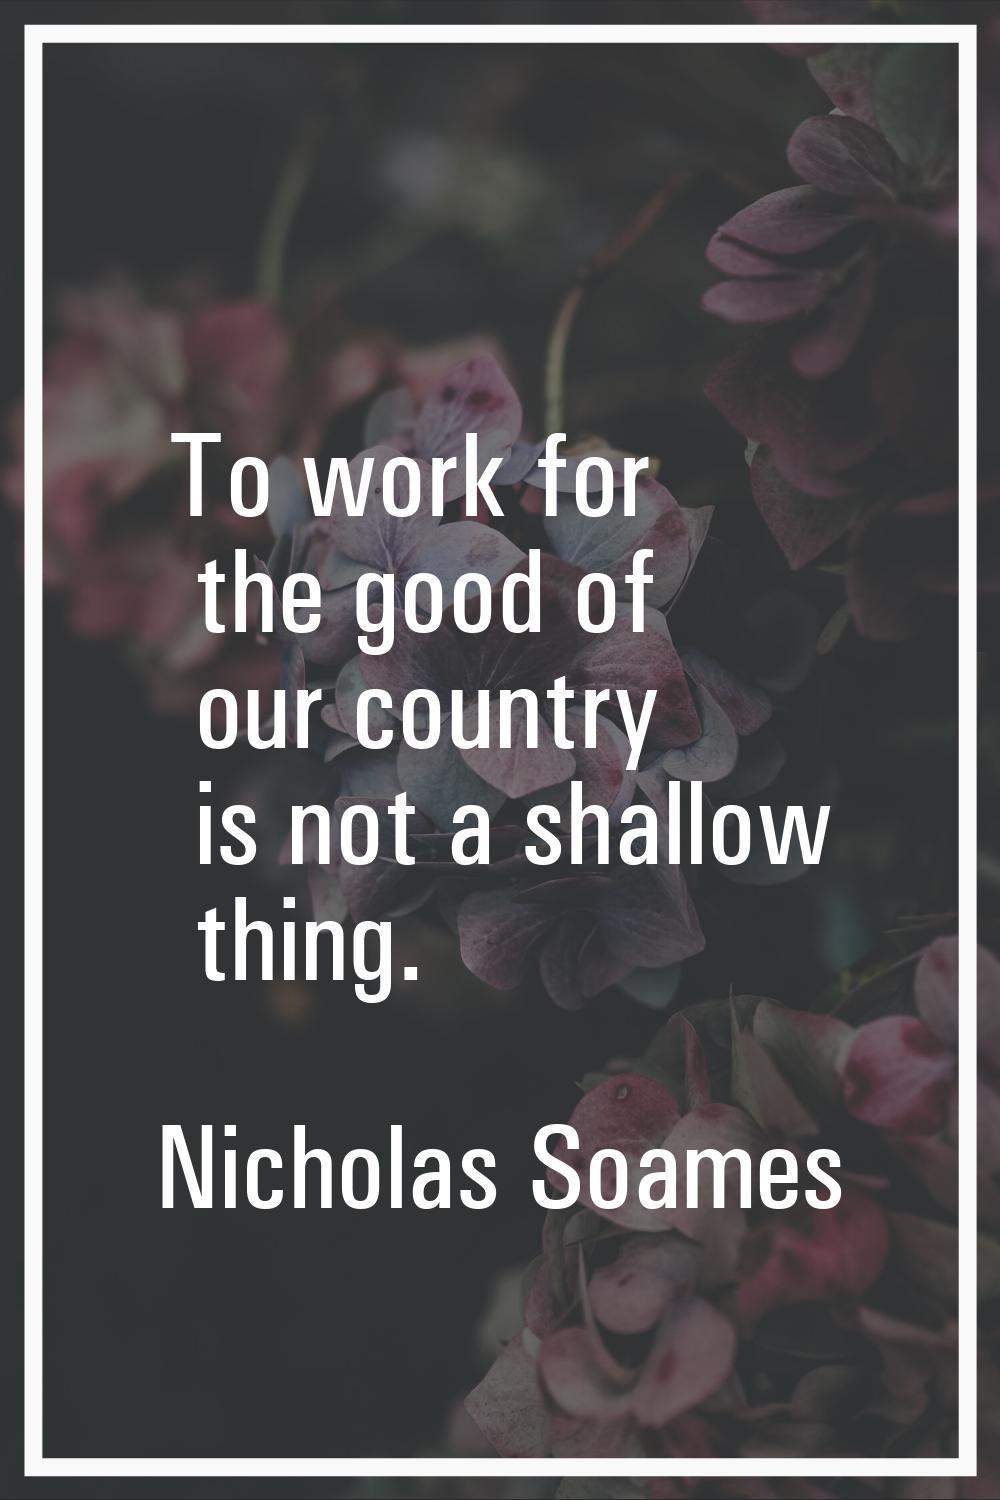 To work for the good of our country is not a shallow thing.